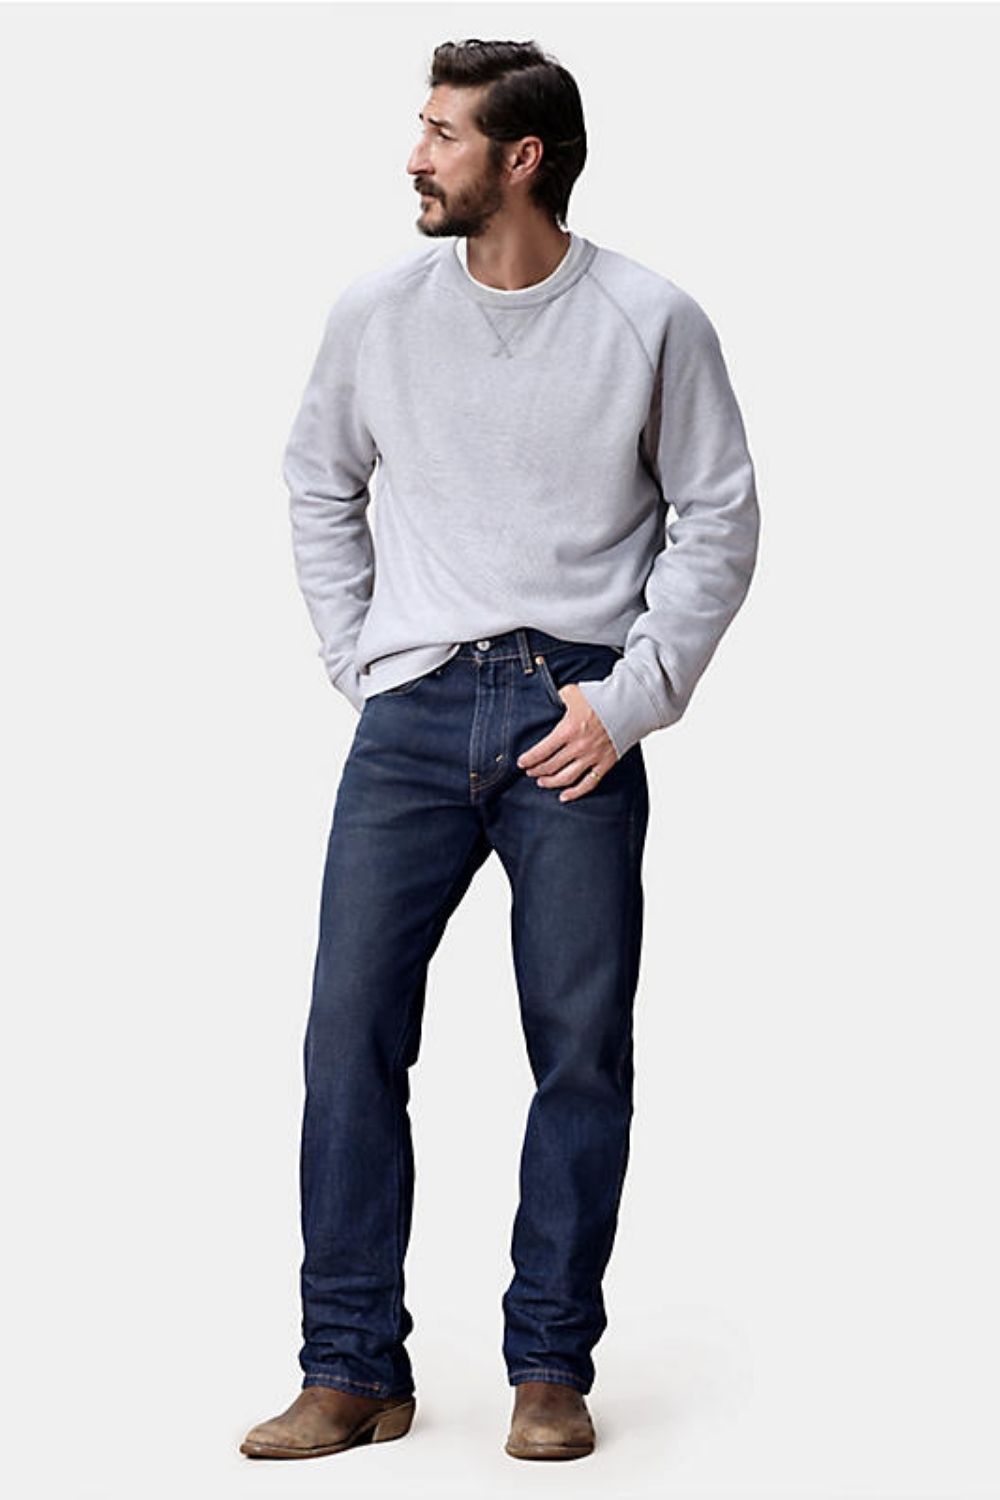 Levi Western Fit Jeans - Titley's Department Store